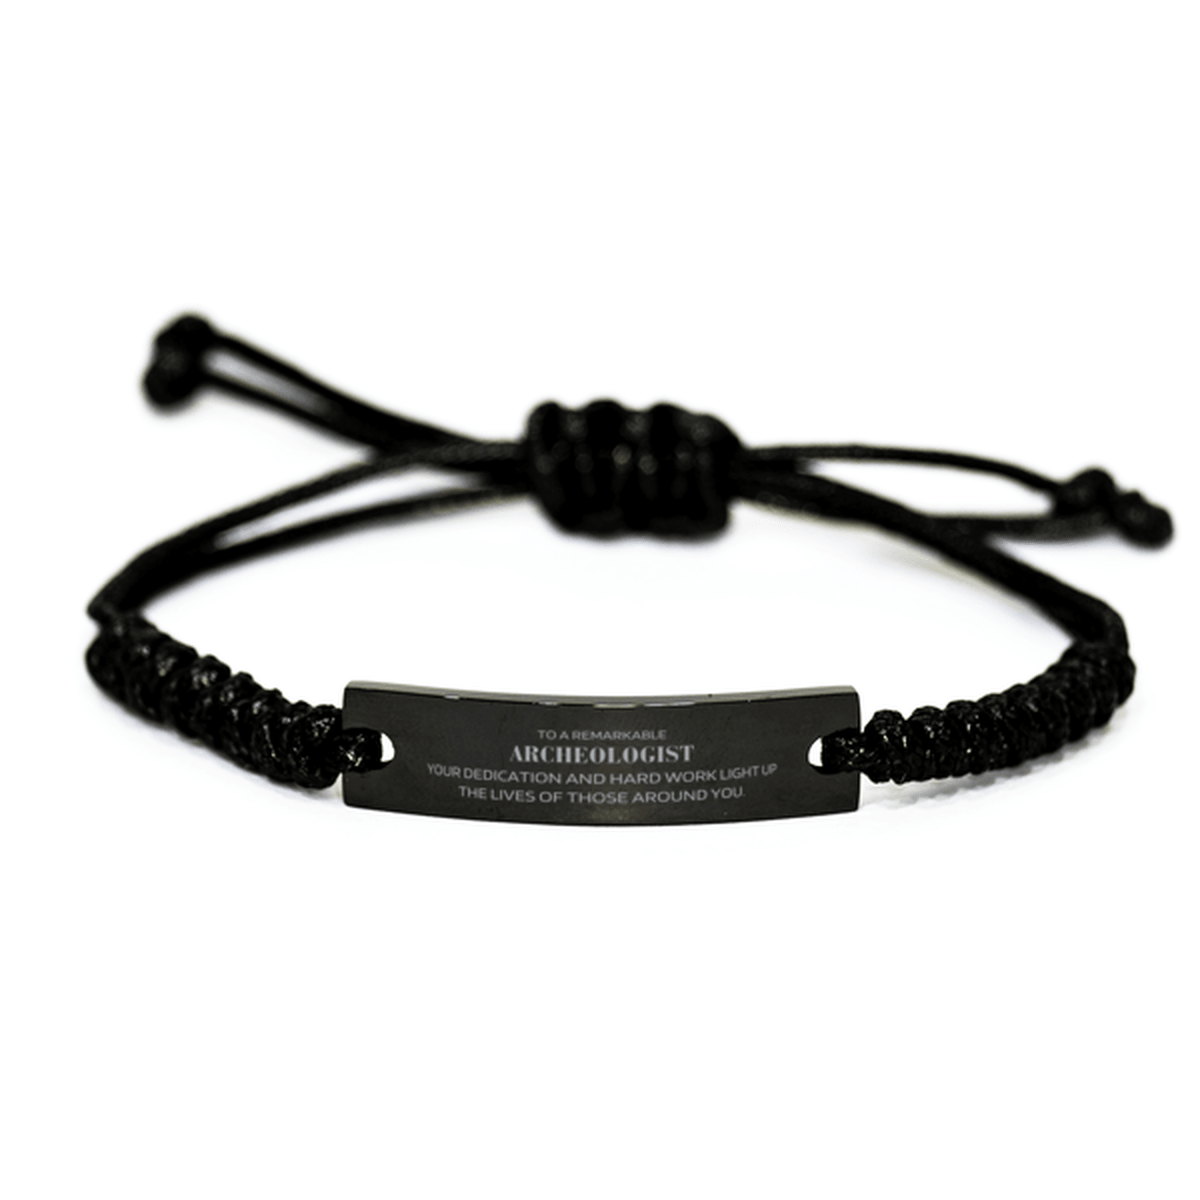 Remarkable Archeologist Gifts, Your dedication and hard work, Inspirational Birthday Christmas Unique Black Rope Bracelet For Archeologist, Coworkers, Men, Women, Friends - Mallard Moon Gift Shop